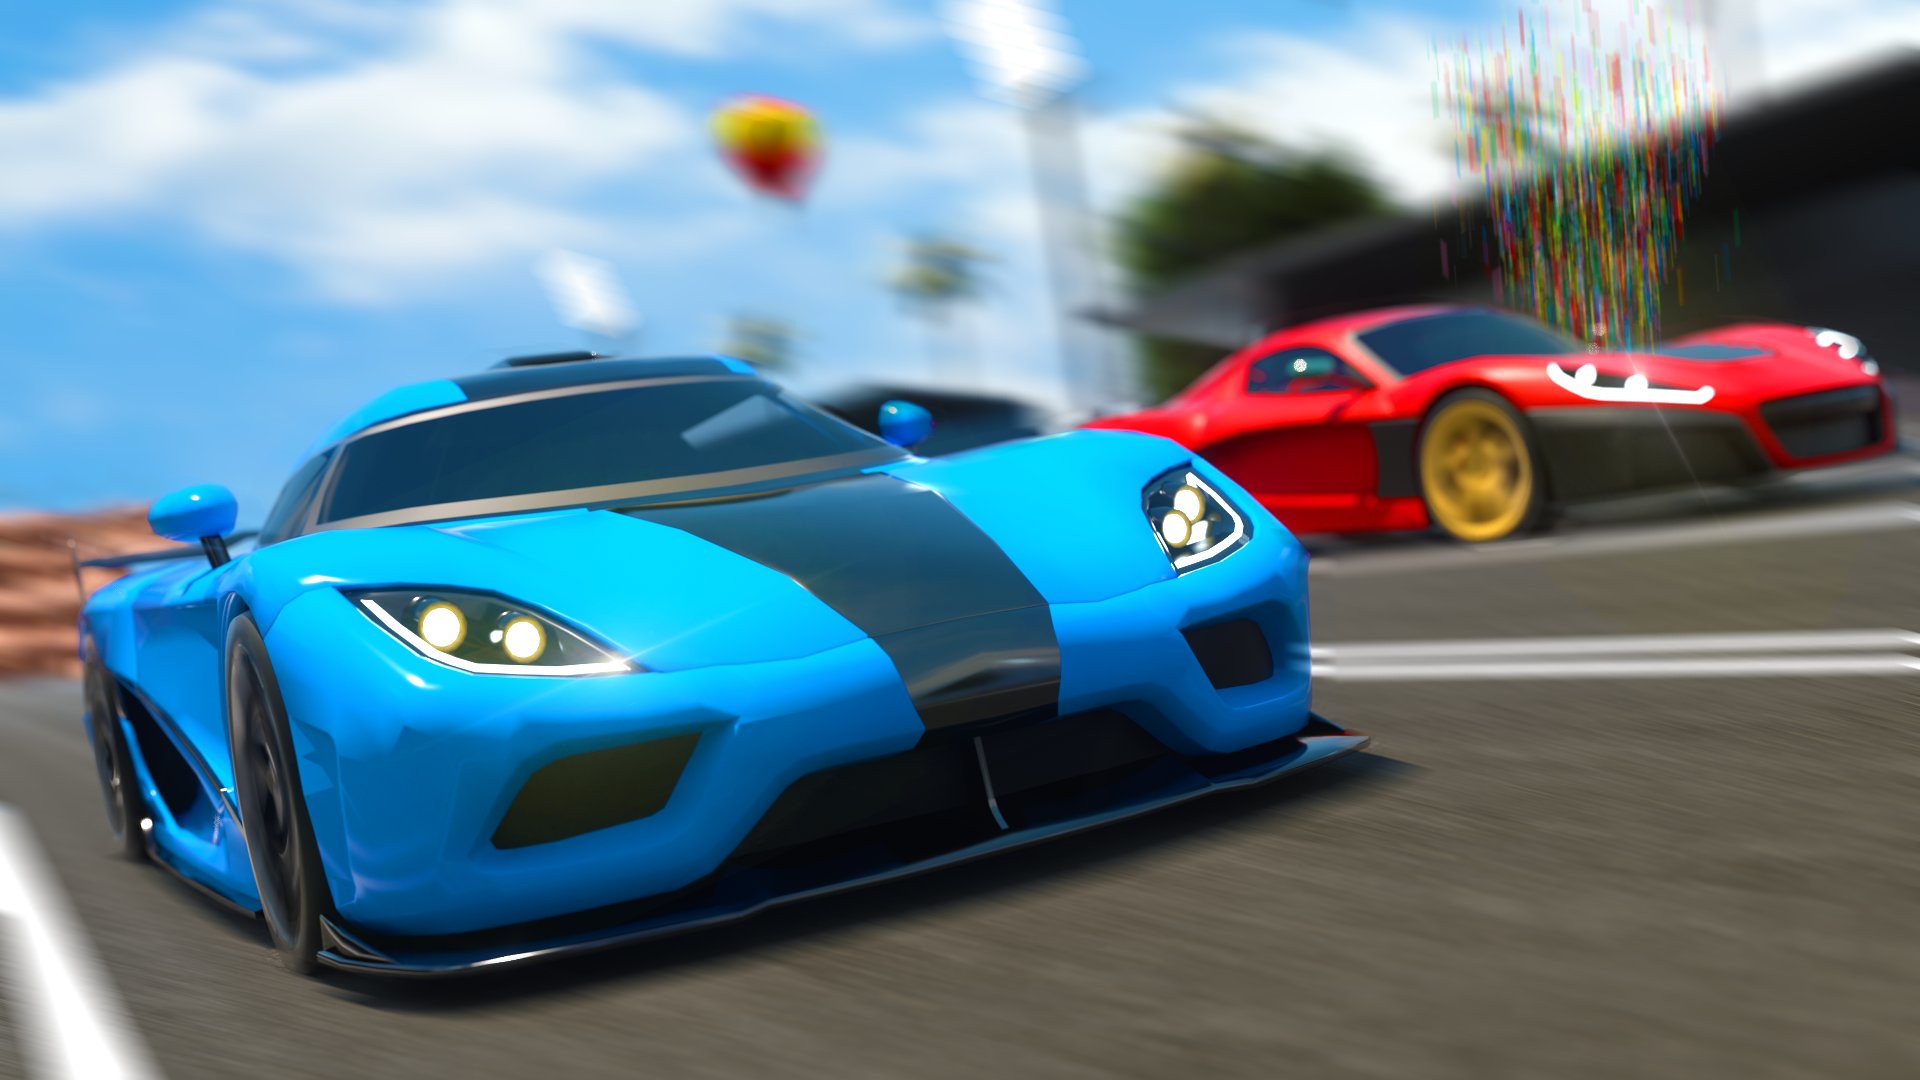 Two supercars, one blue, the other red, race each other along a cement track.